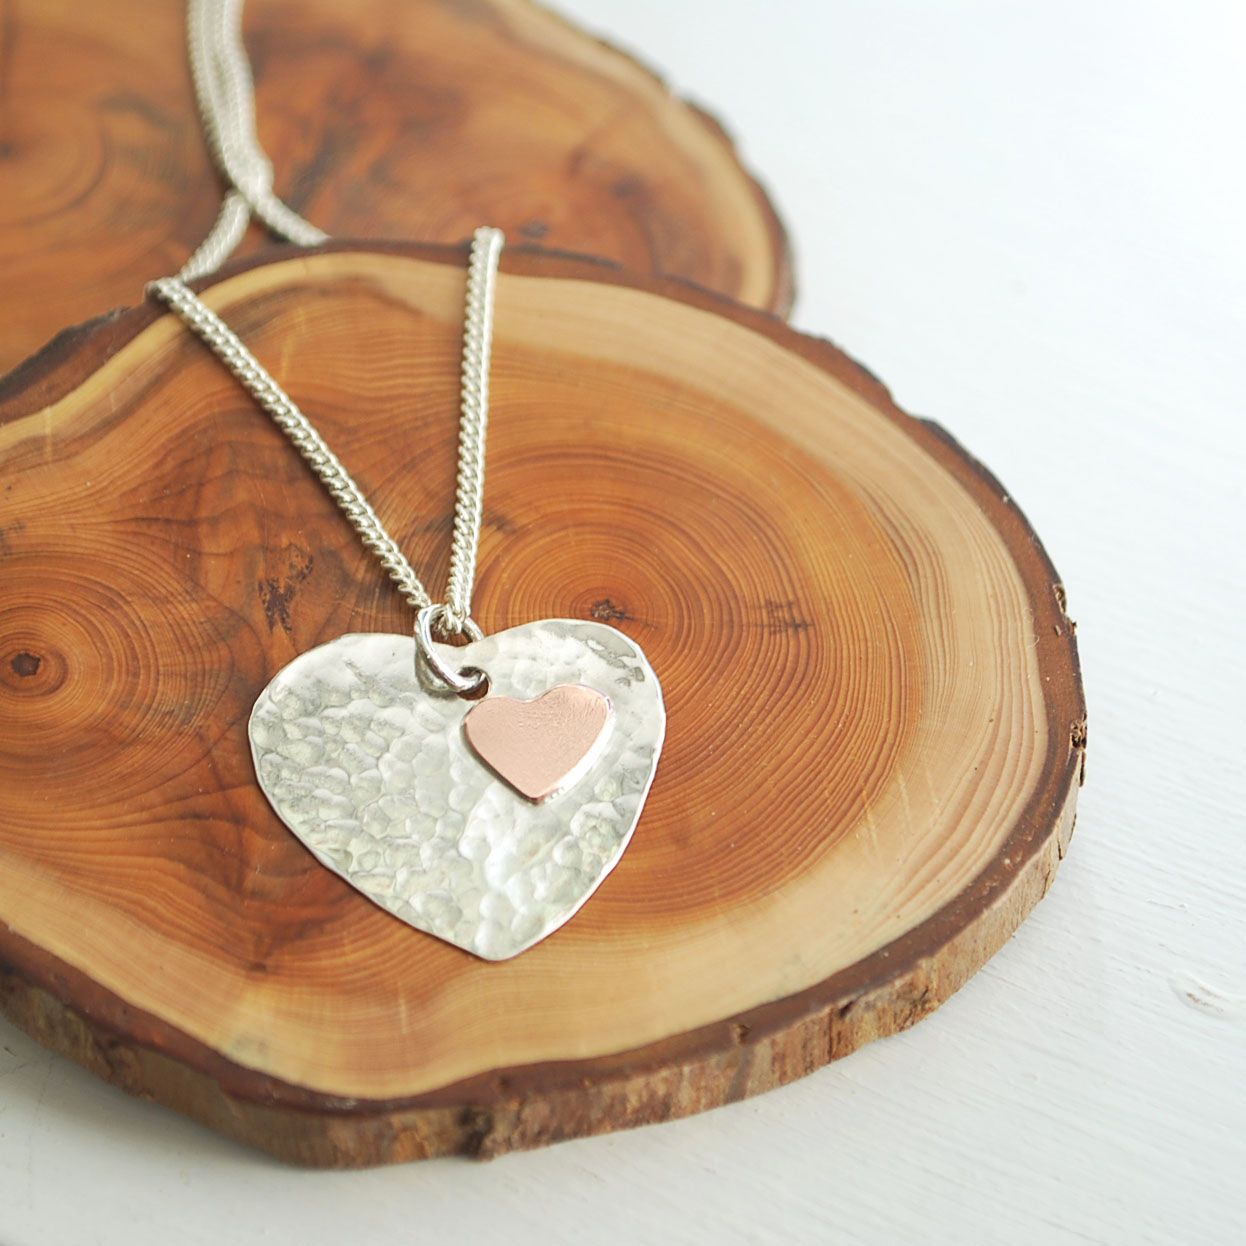 Make A Wooden Heart With Basic Dremel Bits! And Basic Tools 